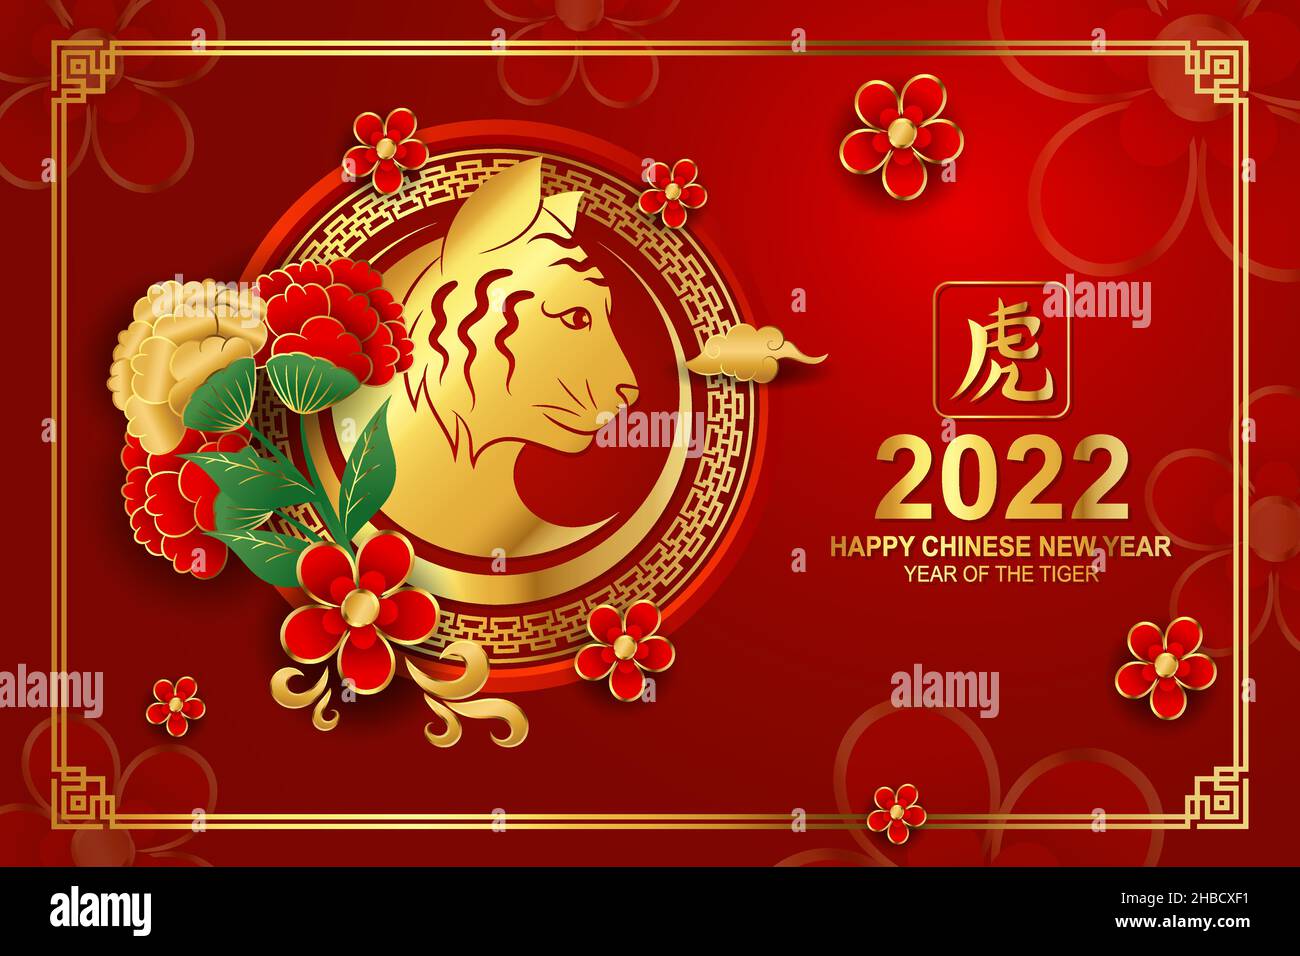 2022 Happy Chinese lunar new year with golden tiger head, floral ornament and red background Stock Vector